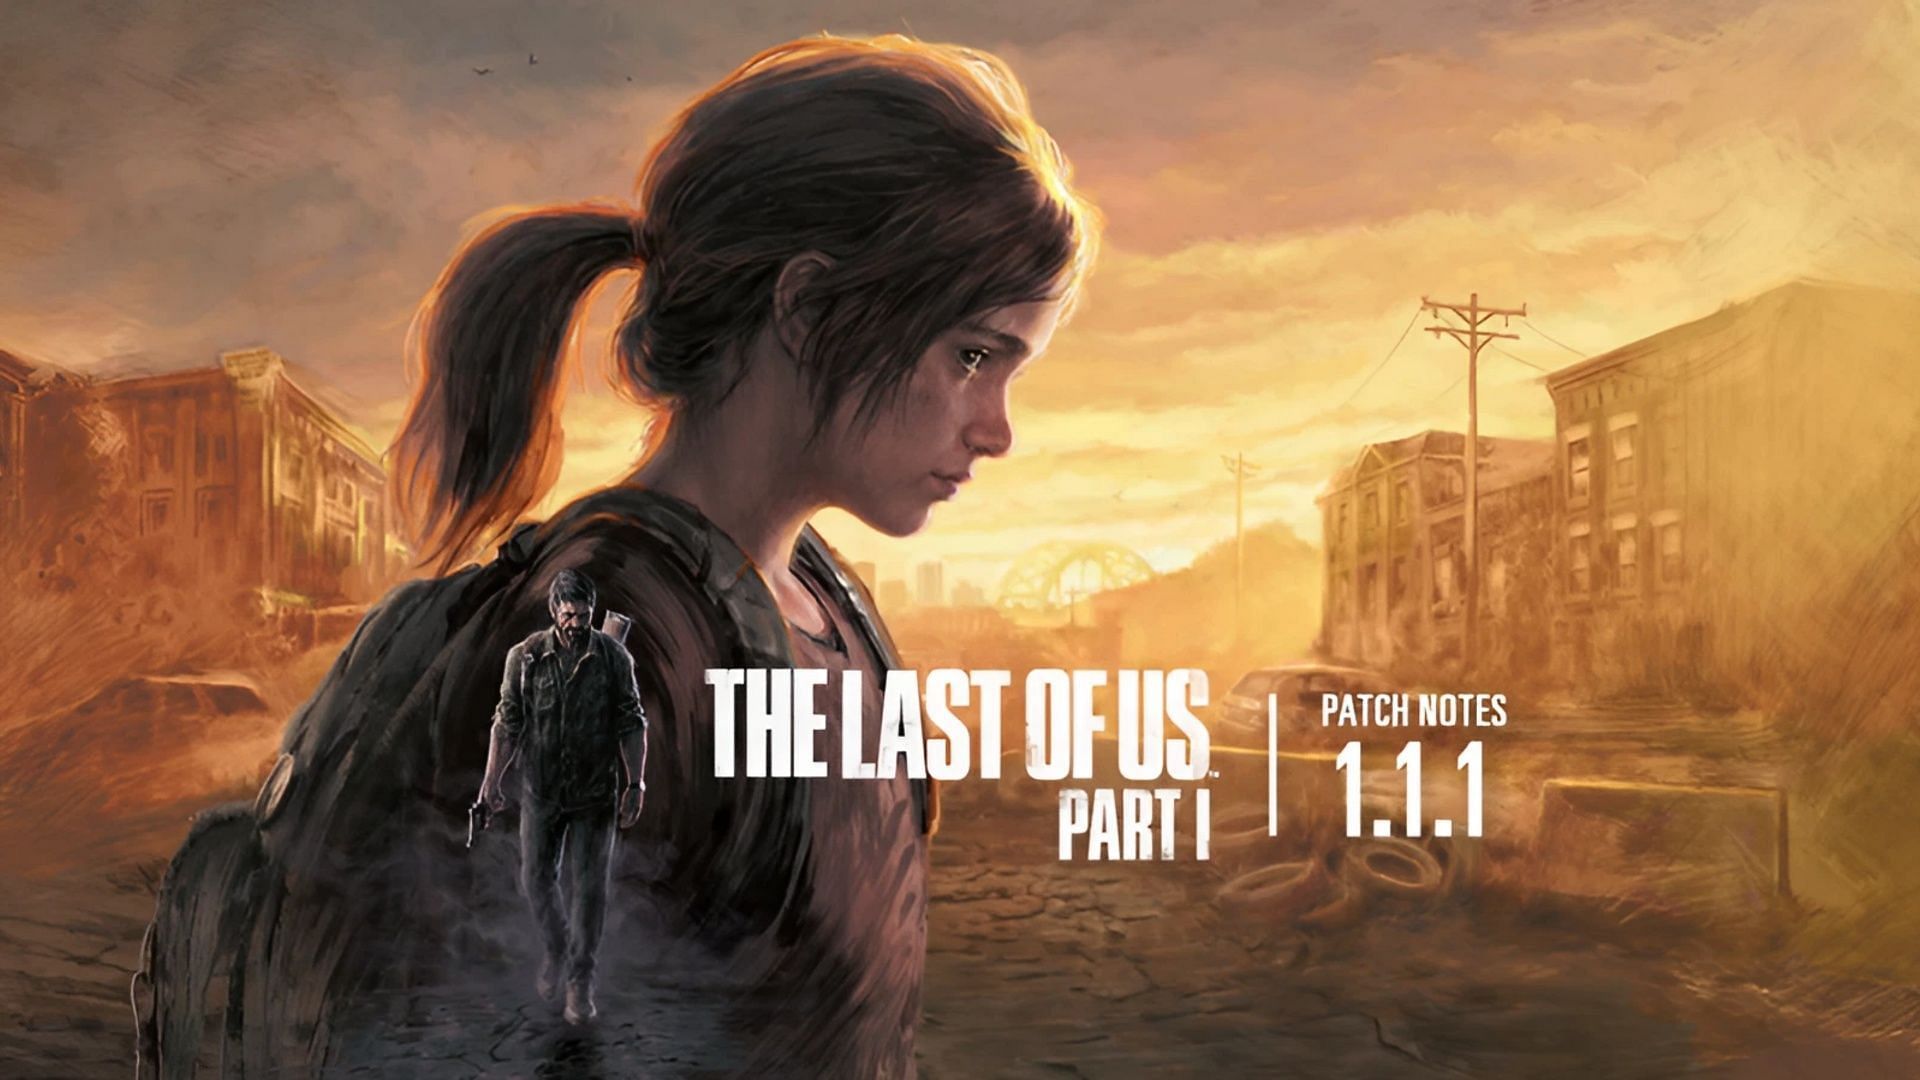 The Last of Us PC Port Reveals Update 1.1.1 Patch Notes - News